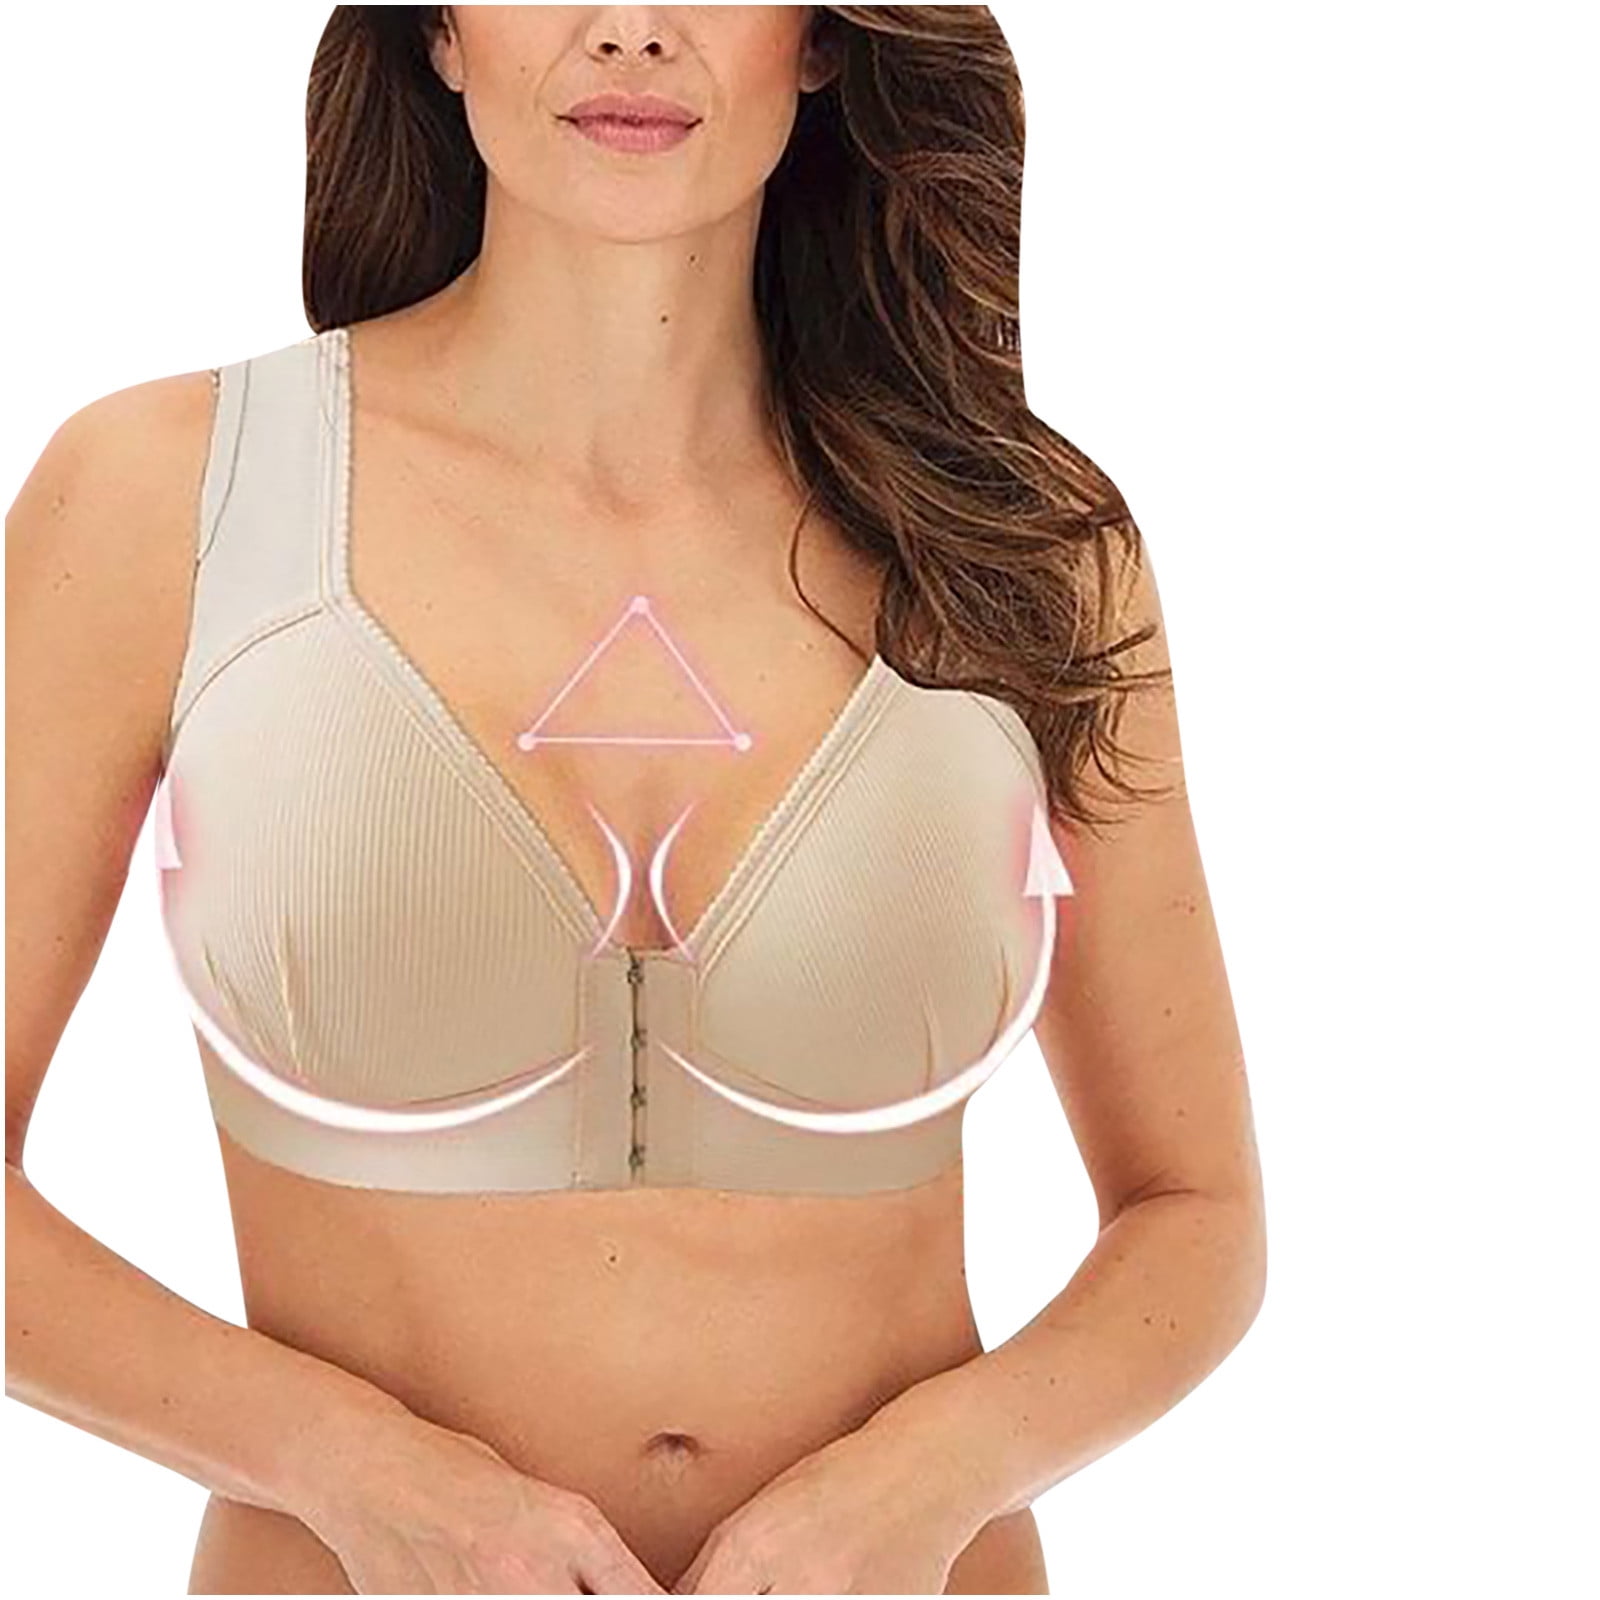 Bras After Breast Surgery